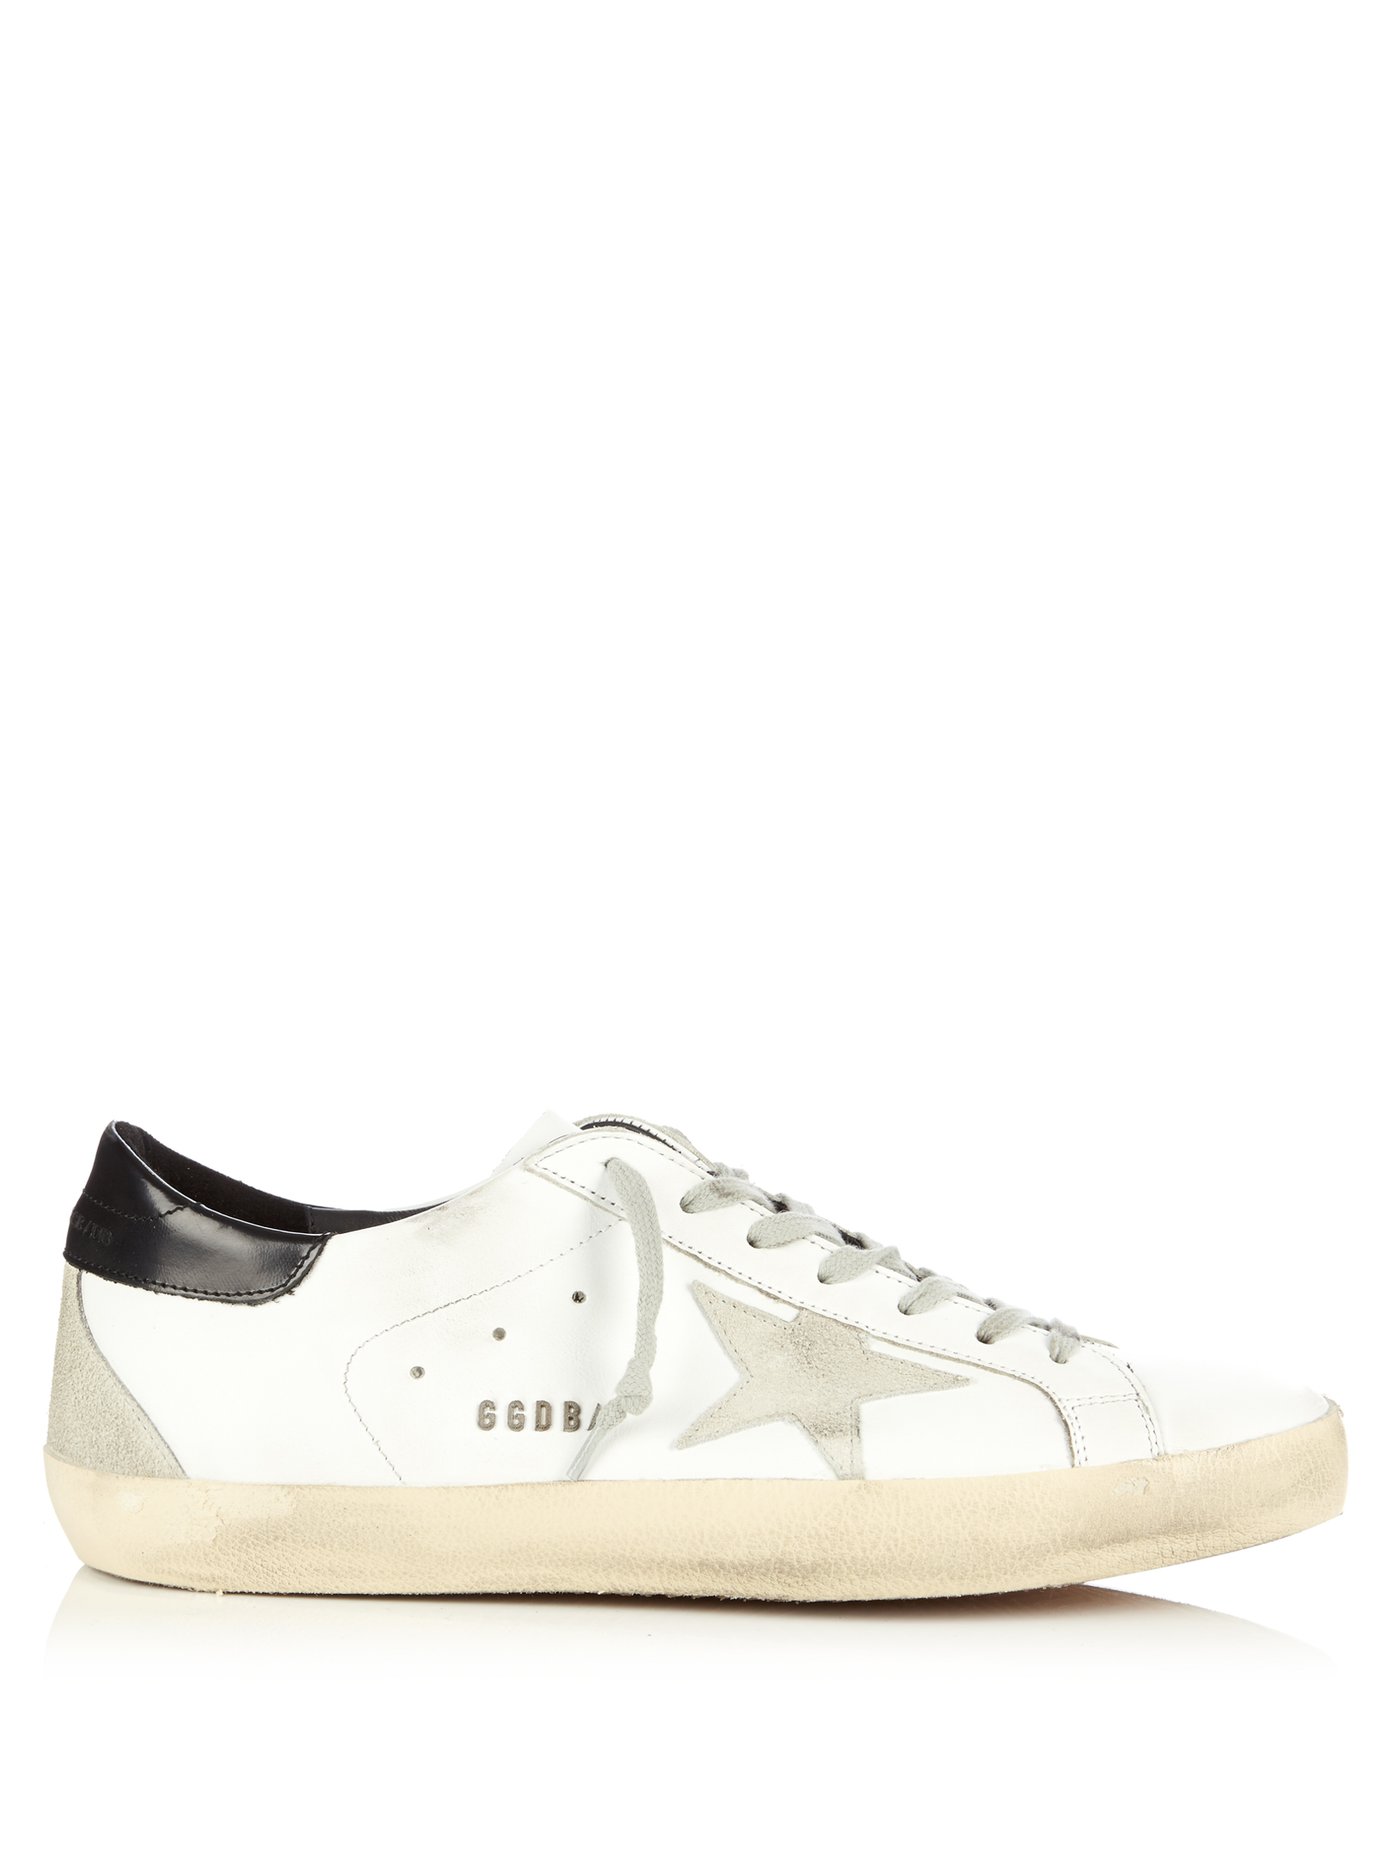 Super Star low-top suede and leather 